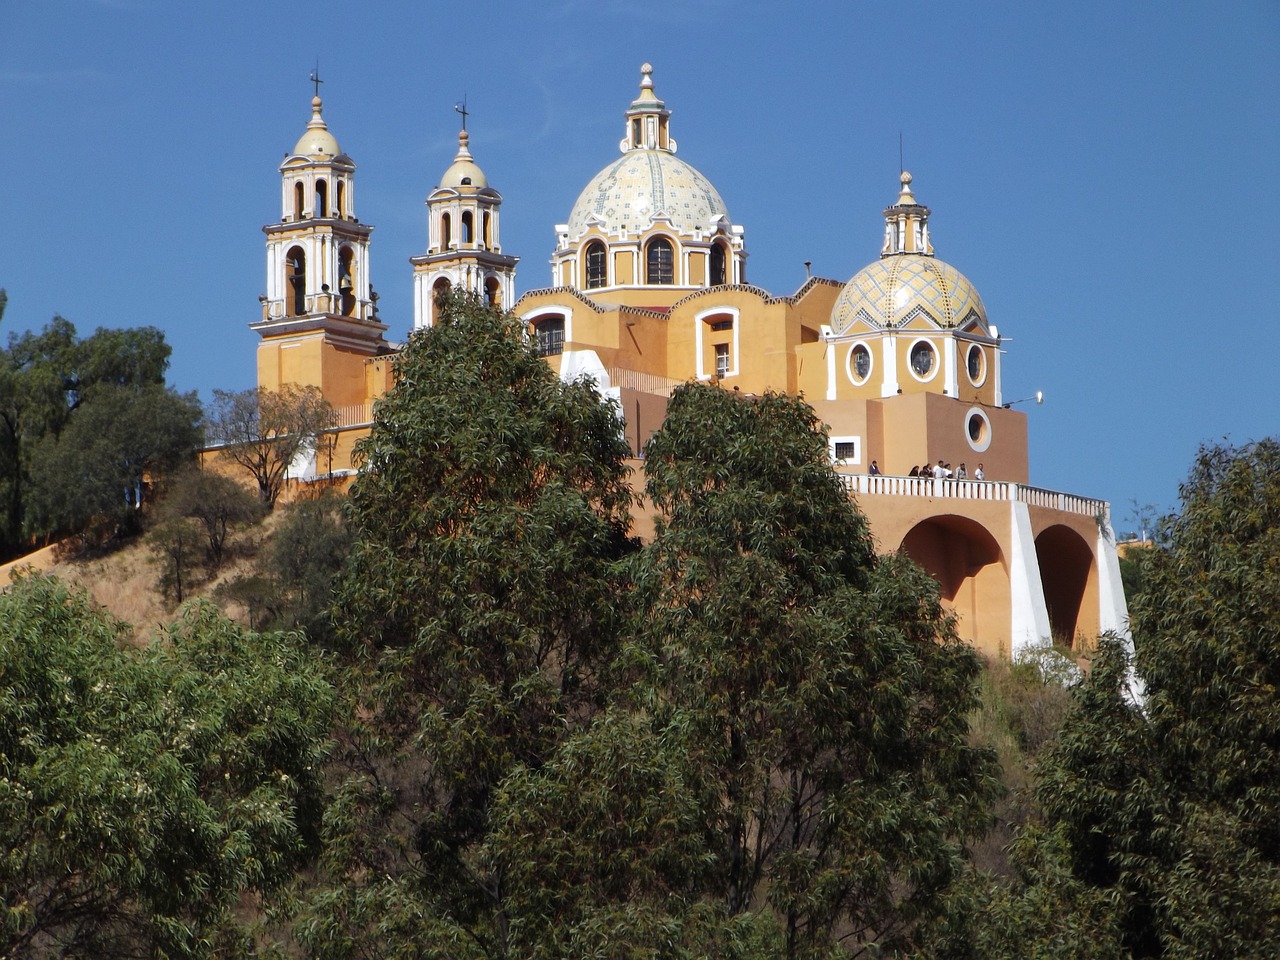 Cholula and Puebla Delights in 2 Days